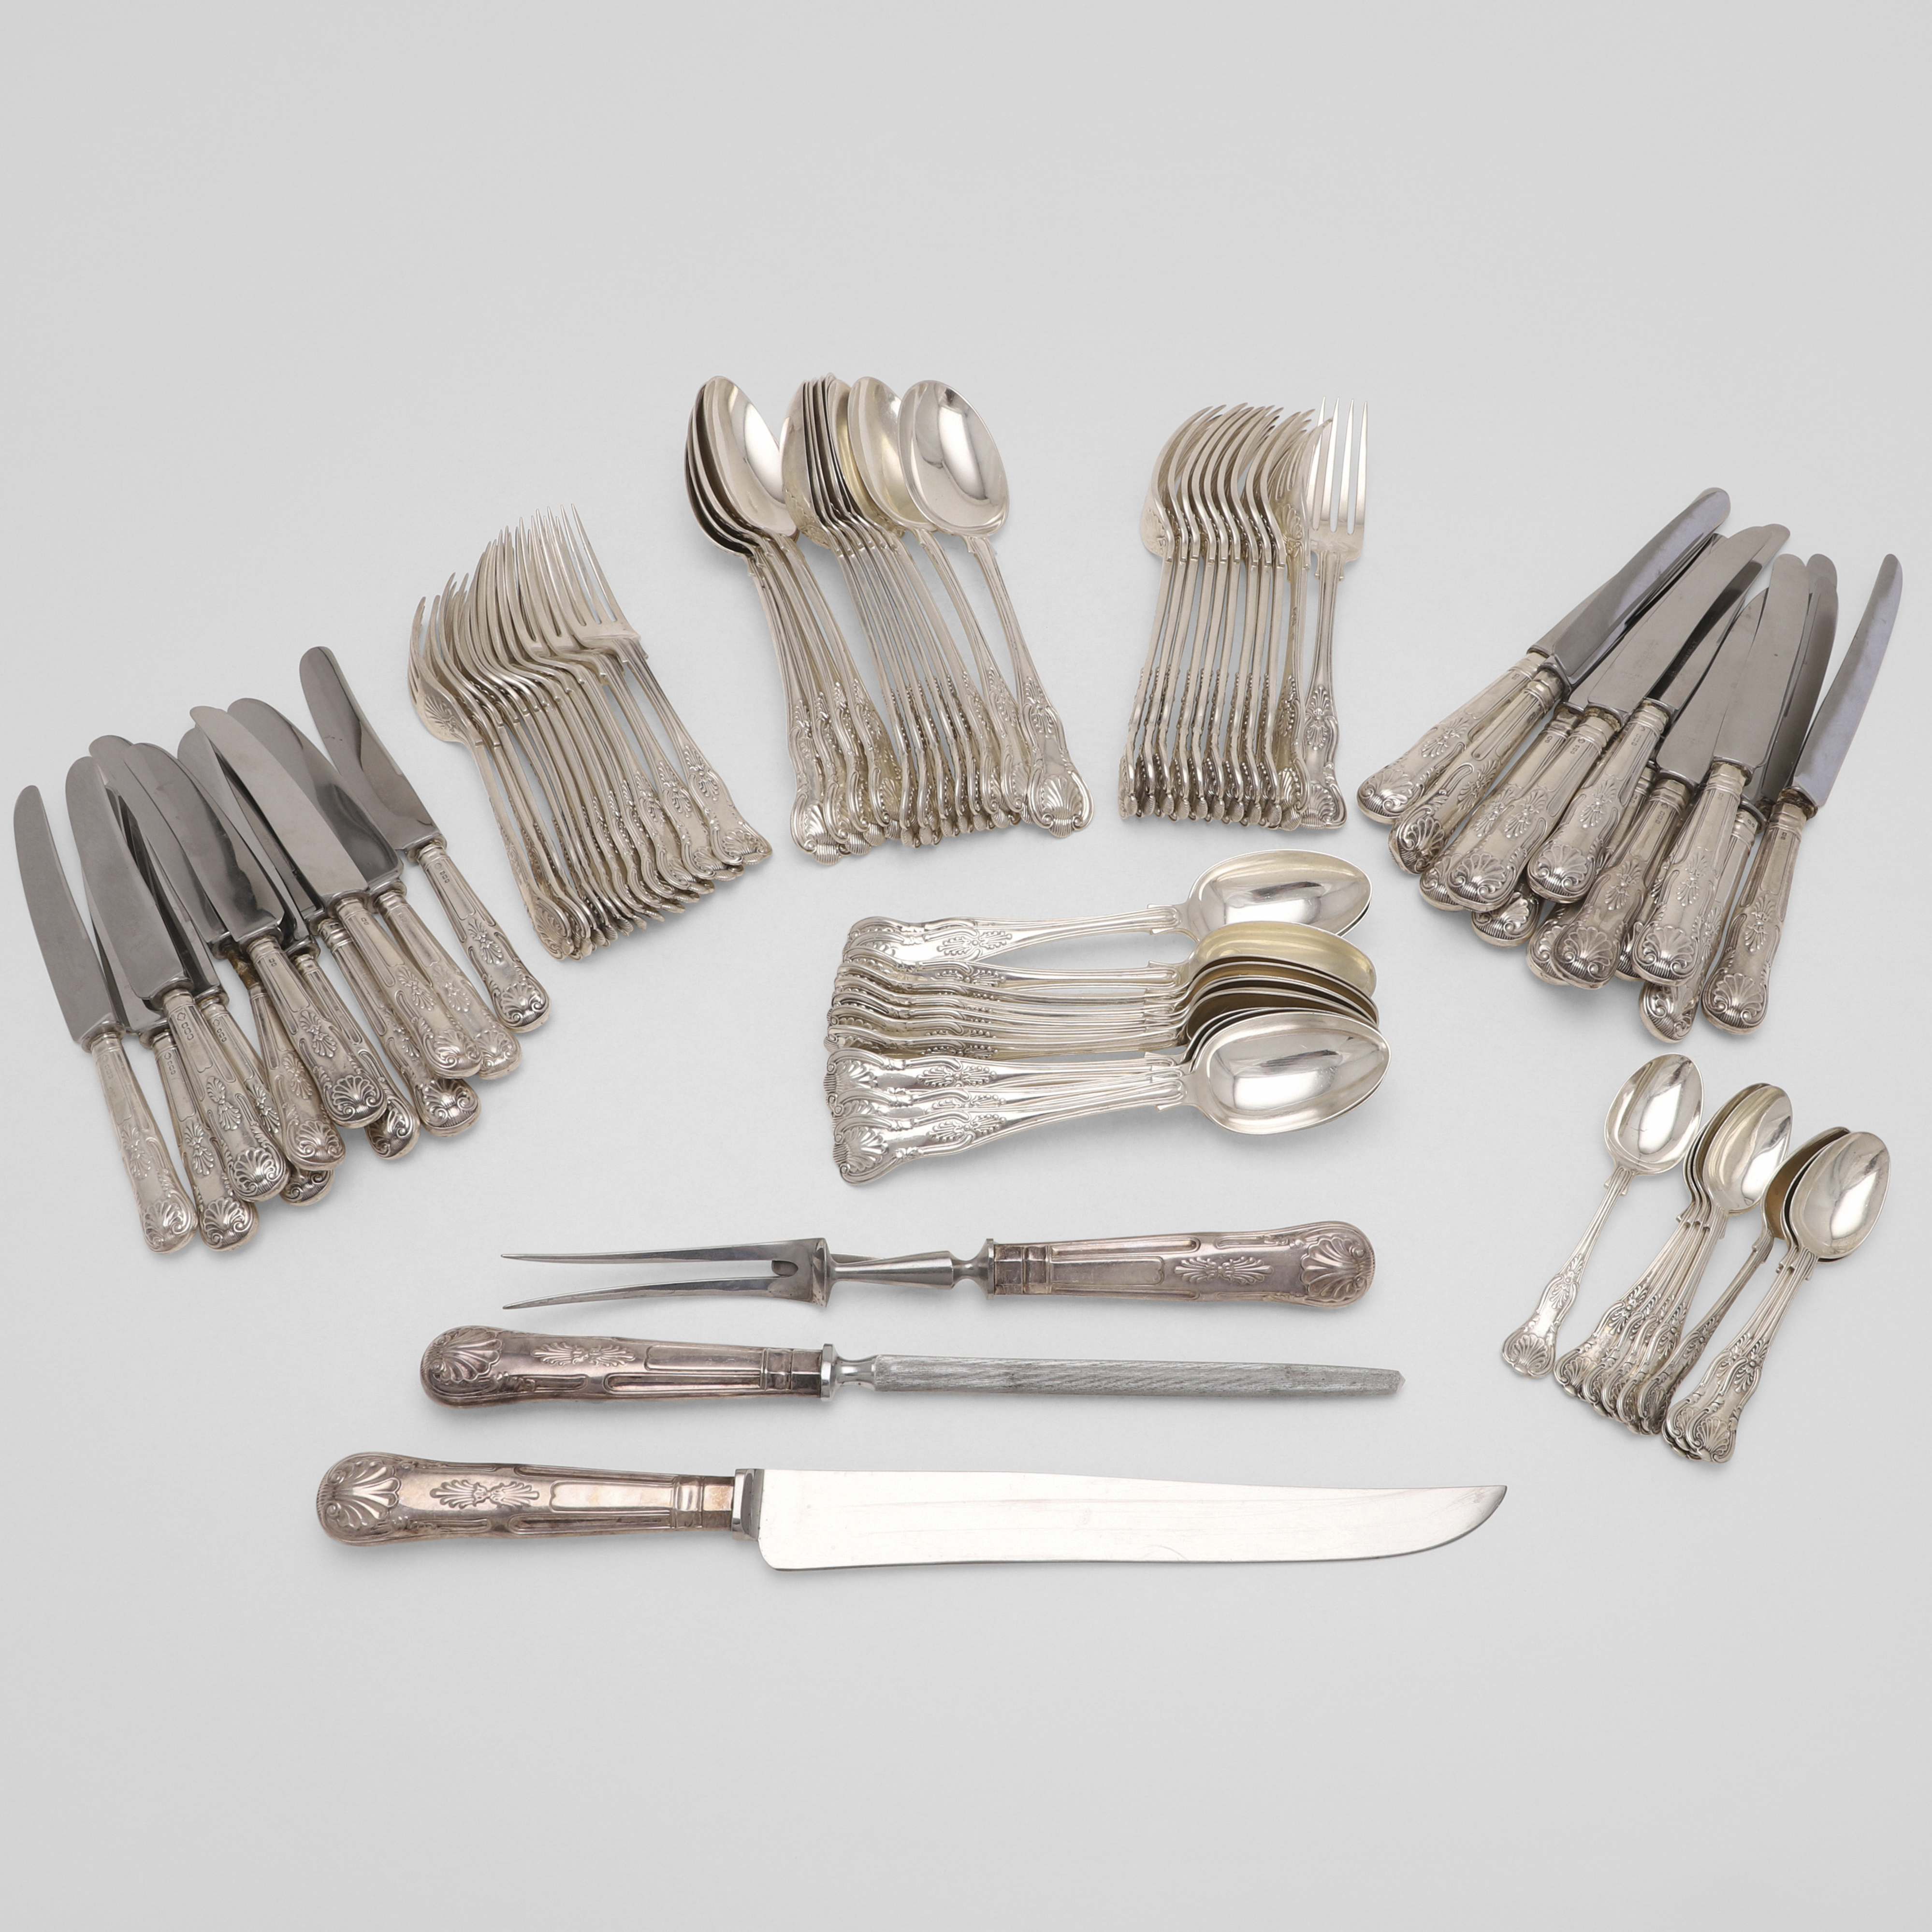 AN EARLY 20TH CENTURY MATCHED PART-CANTEEN OF KING'S PATTERN FLATWARE & CUTLERY:-.